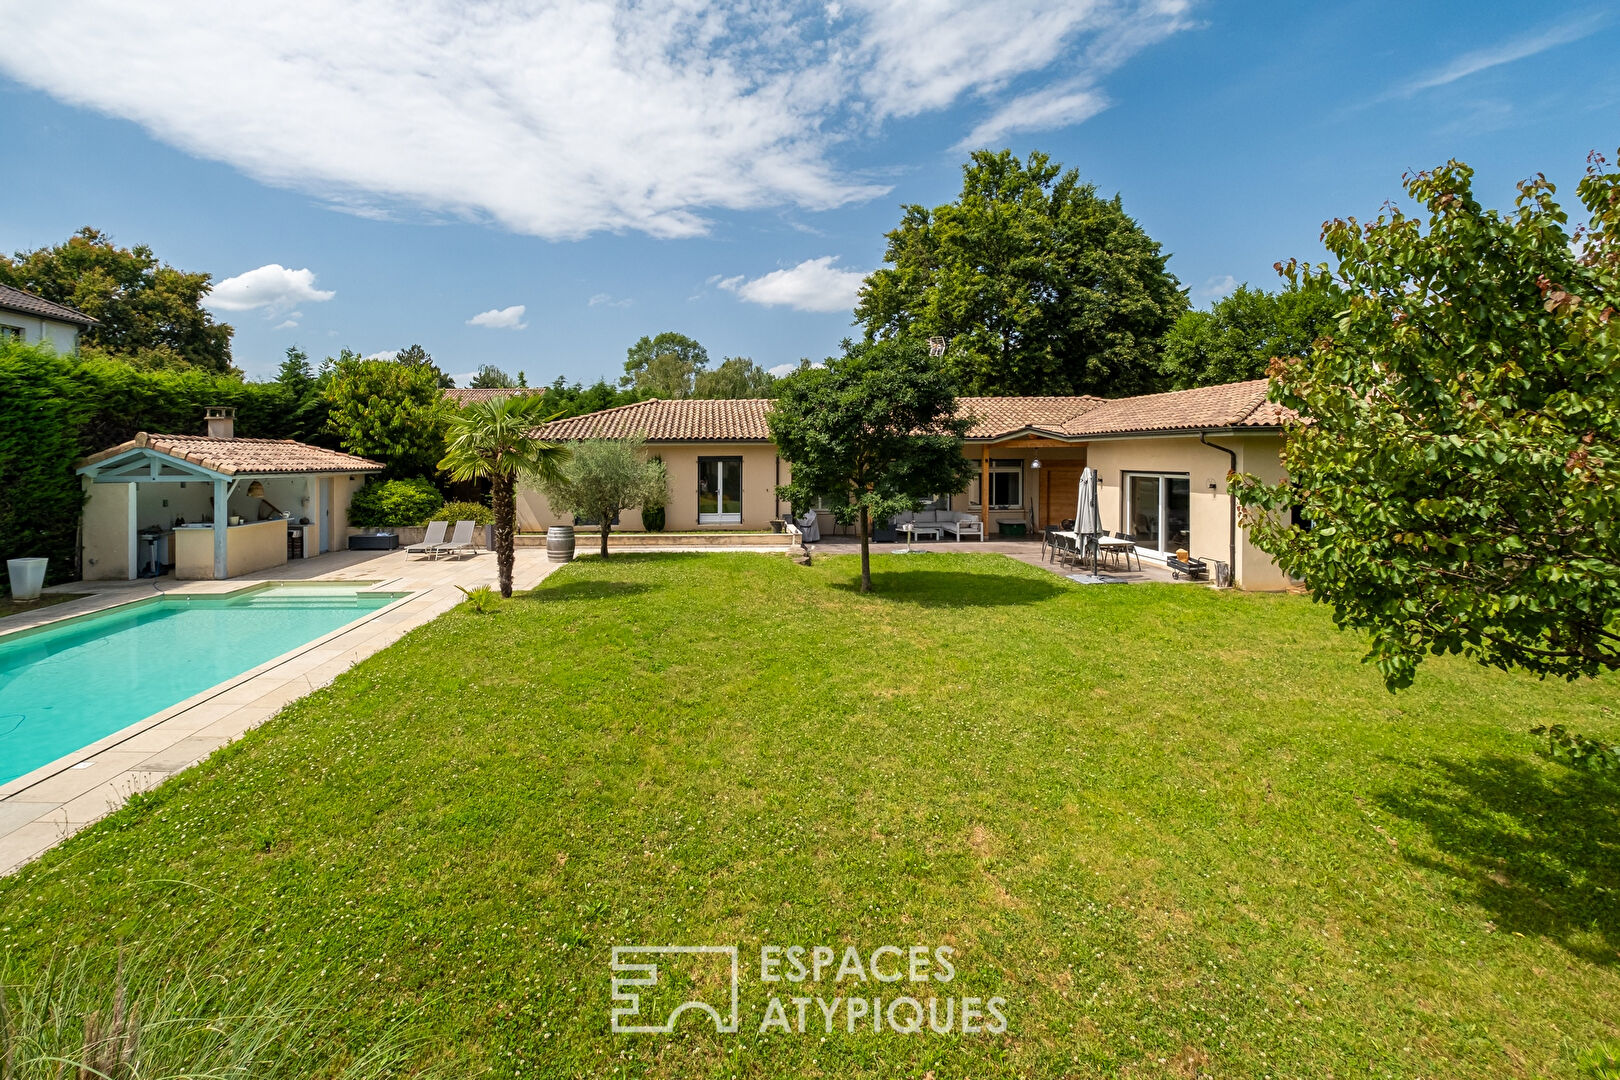 Single storey villa with swimming pool near the center of Ecully